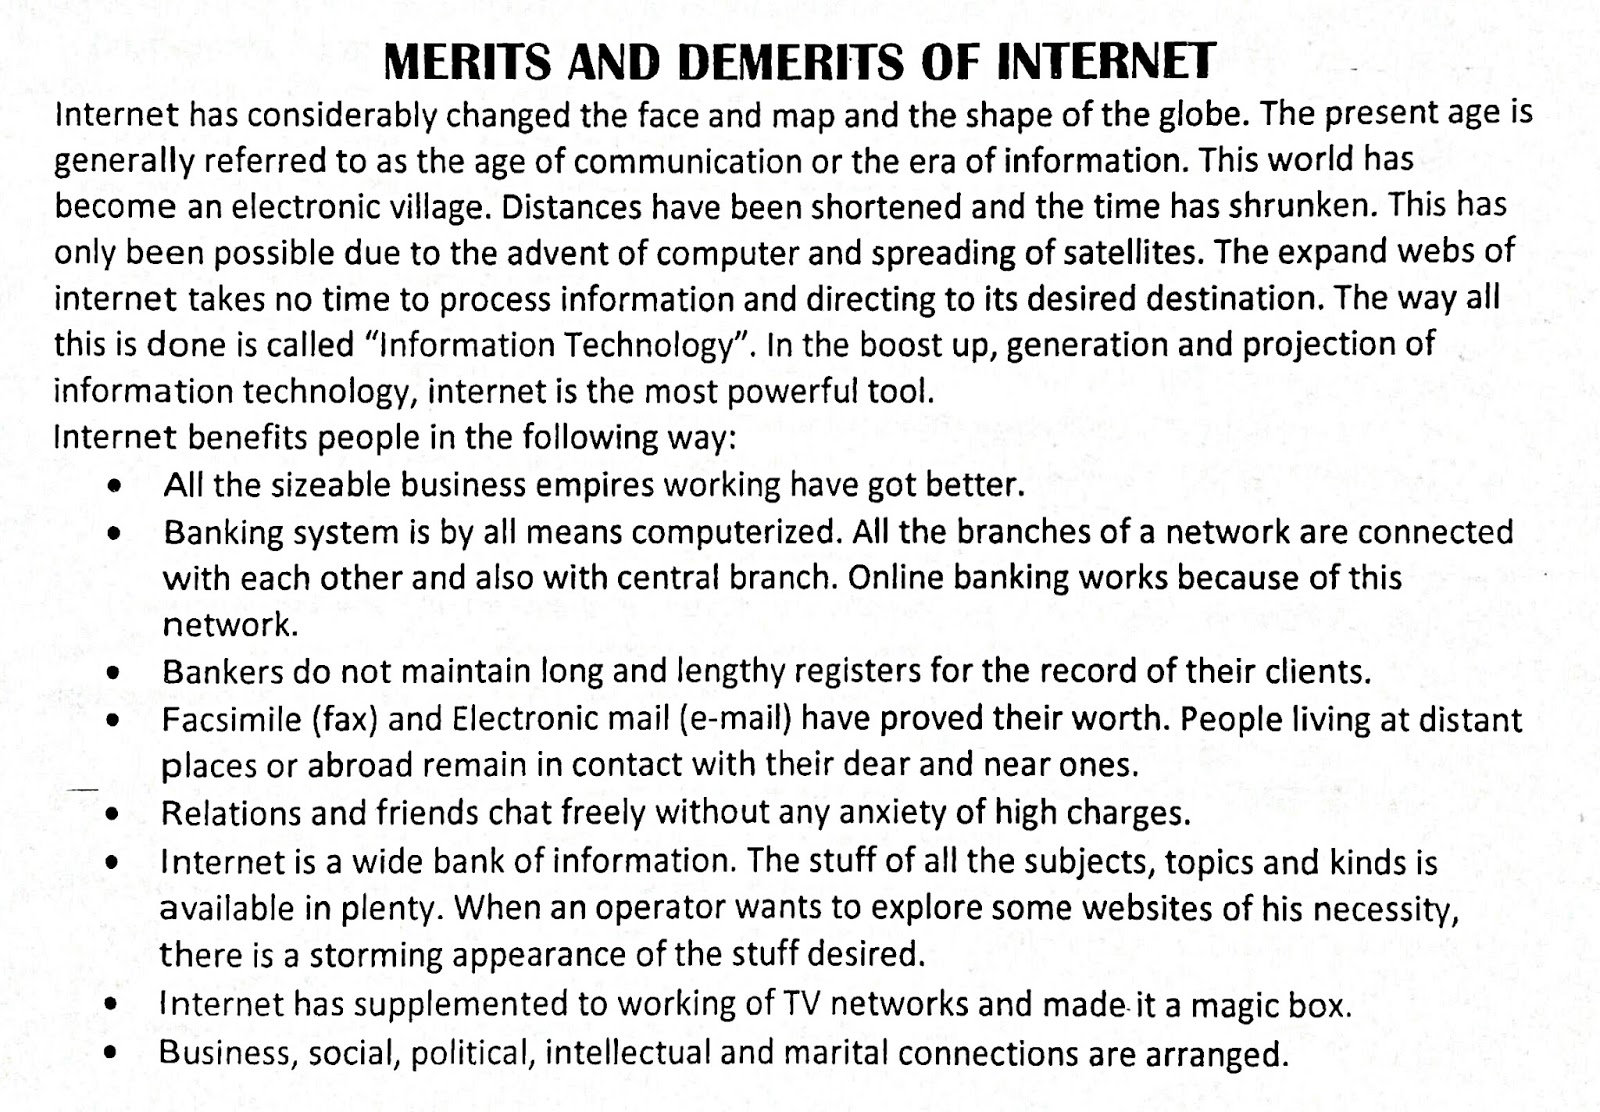 essay on merits and demerits of internet